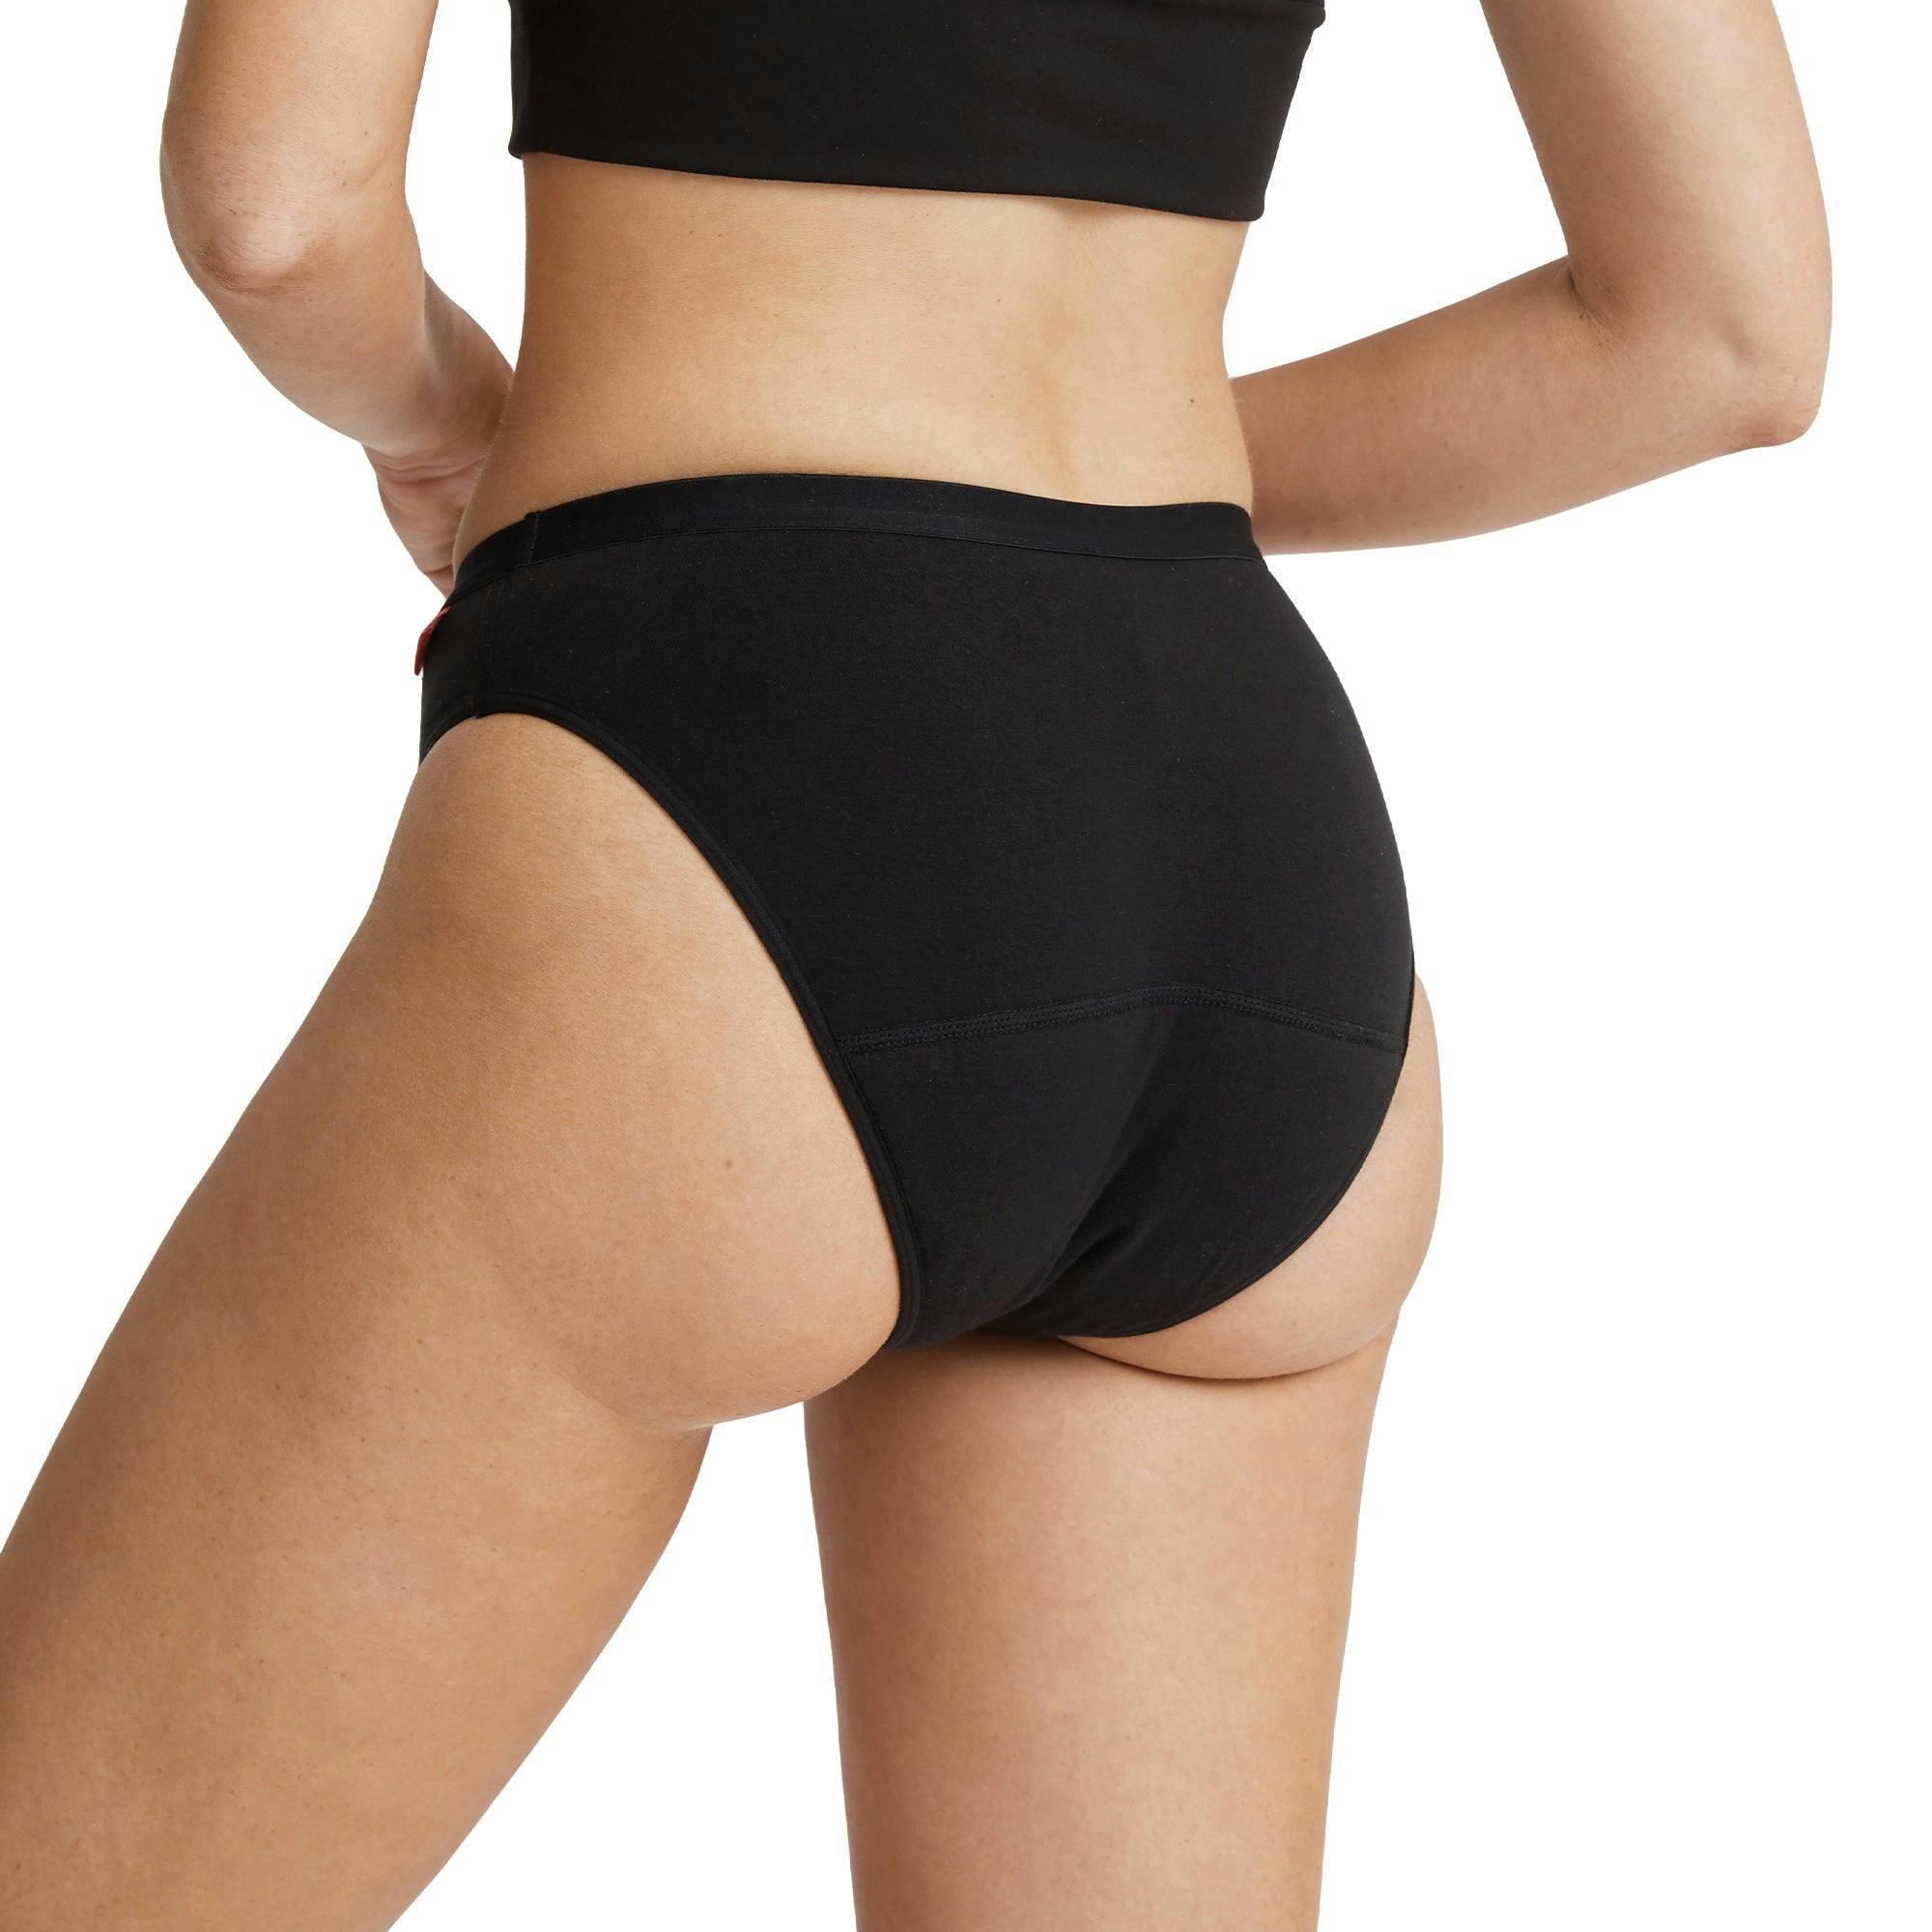 Scarlet Black Period-Proof Everday Brief - Light to Moderate